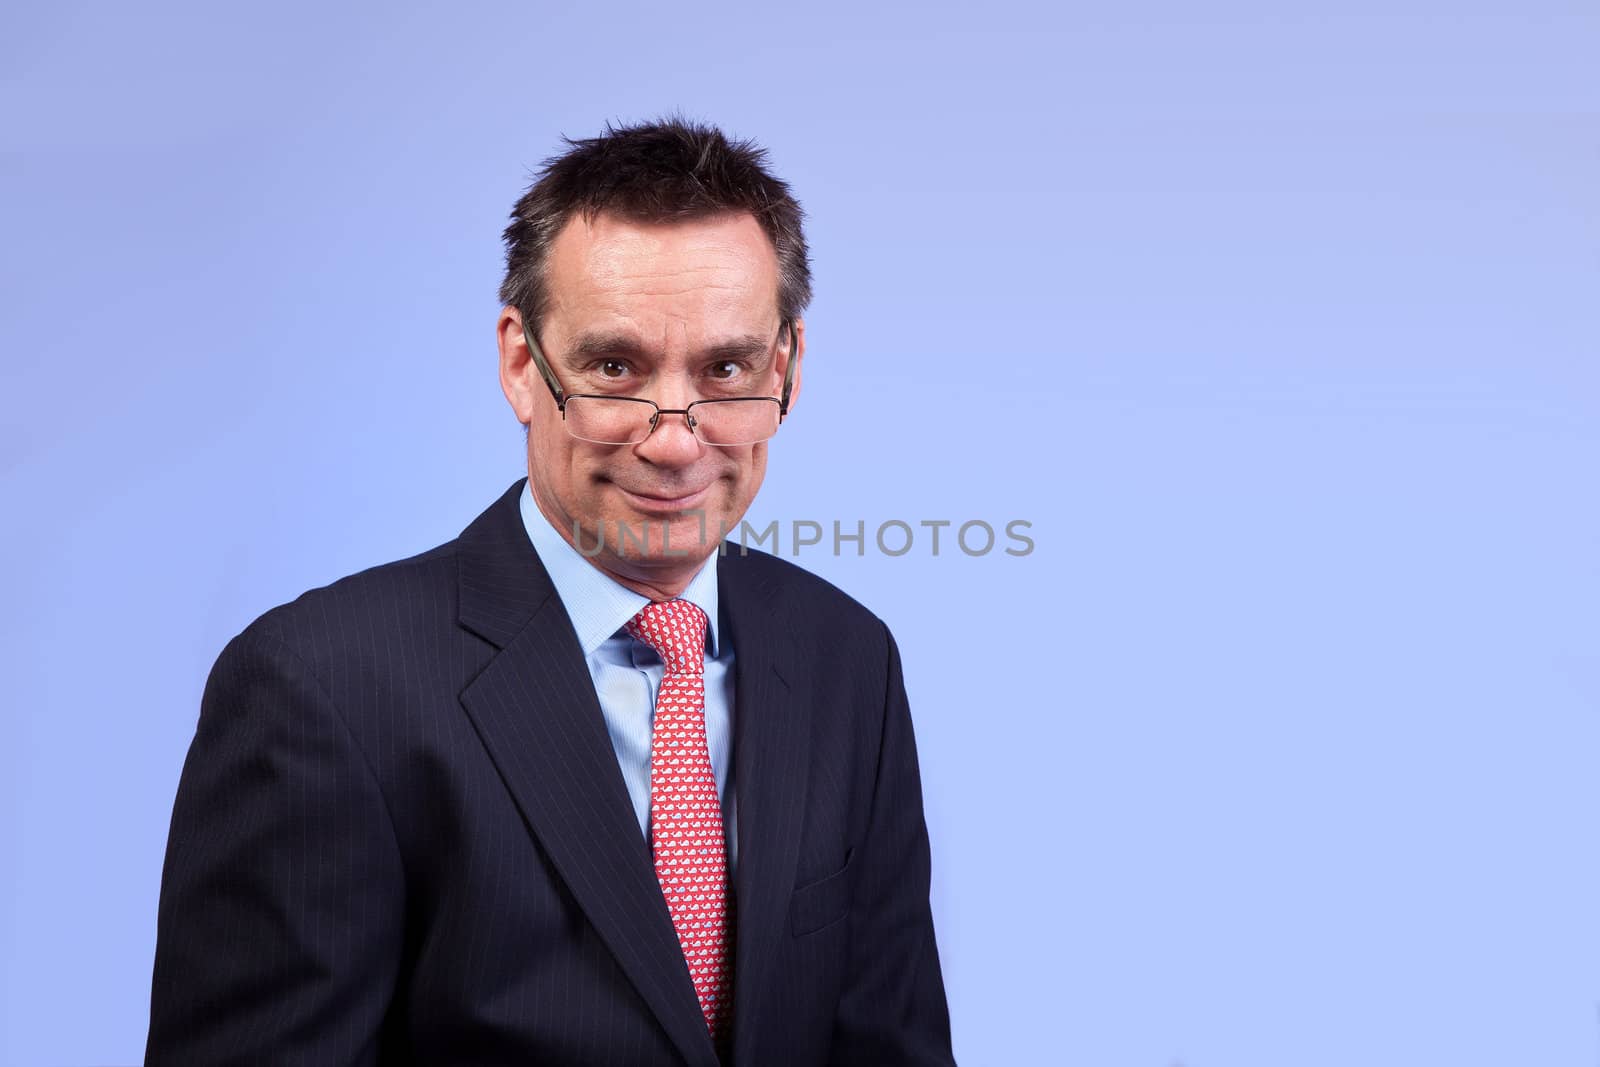 Smiling Business Man in Suit Looking Over Glasses on Blue Background